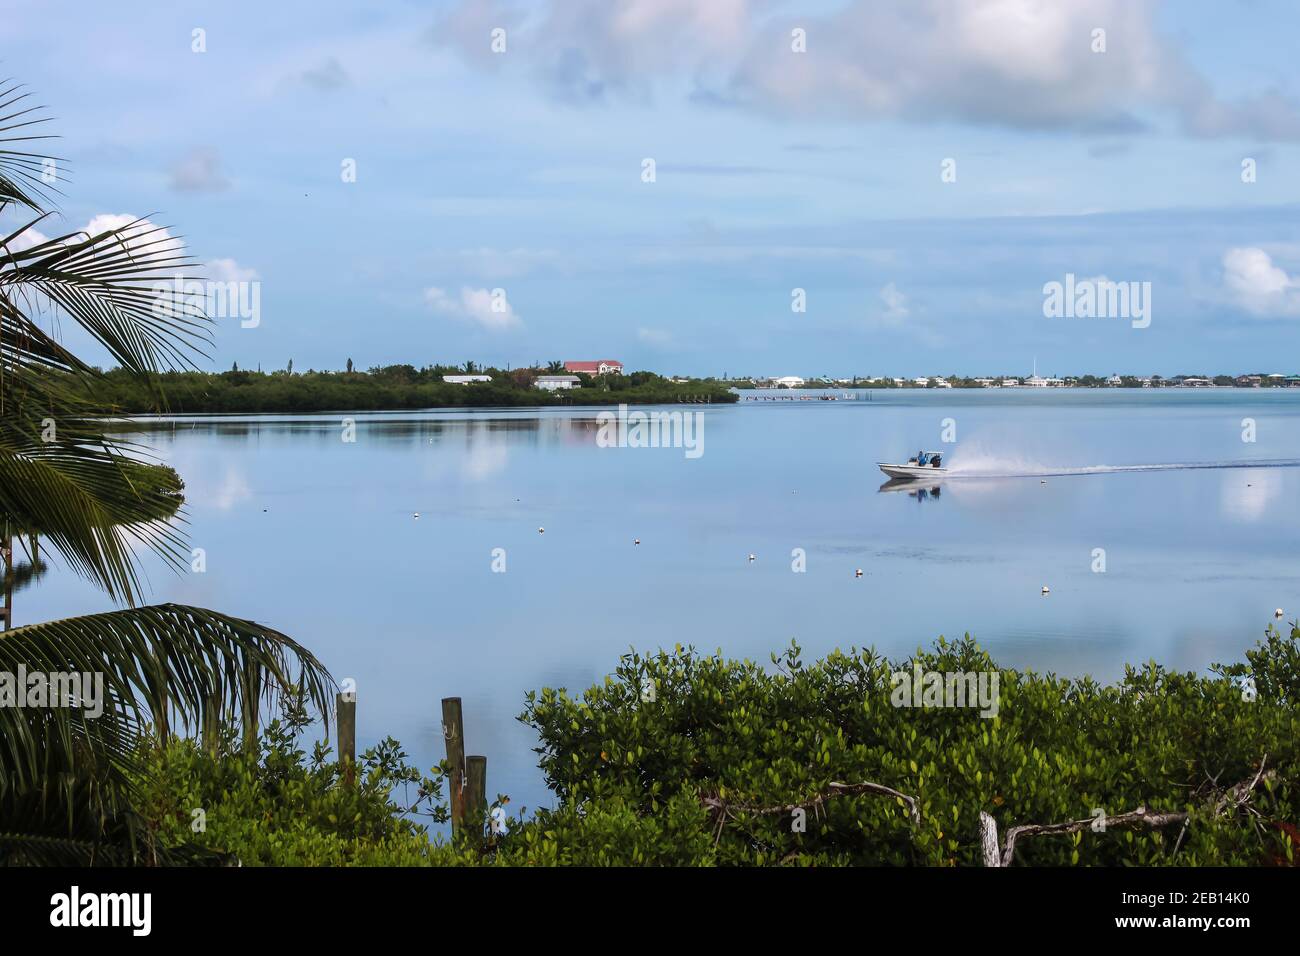 A good day for fishing in the Florida Keys - a small fishing boat races across the water on an ocean like glass reflecting a very blue sky with palms Stock Photo